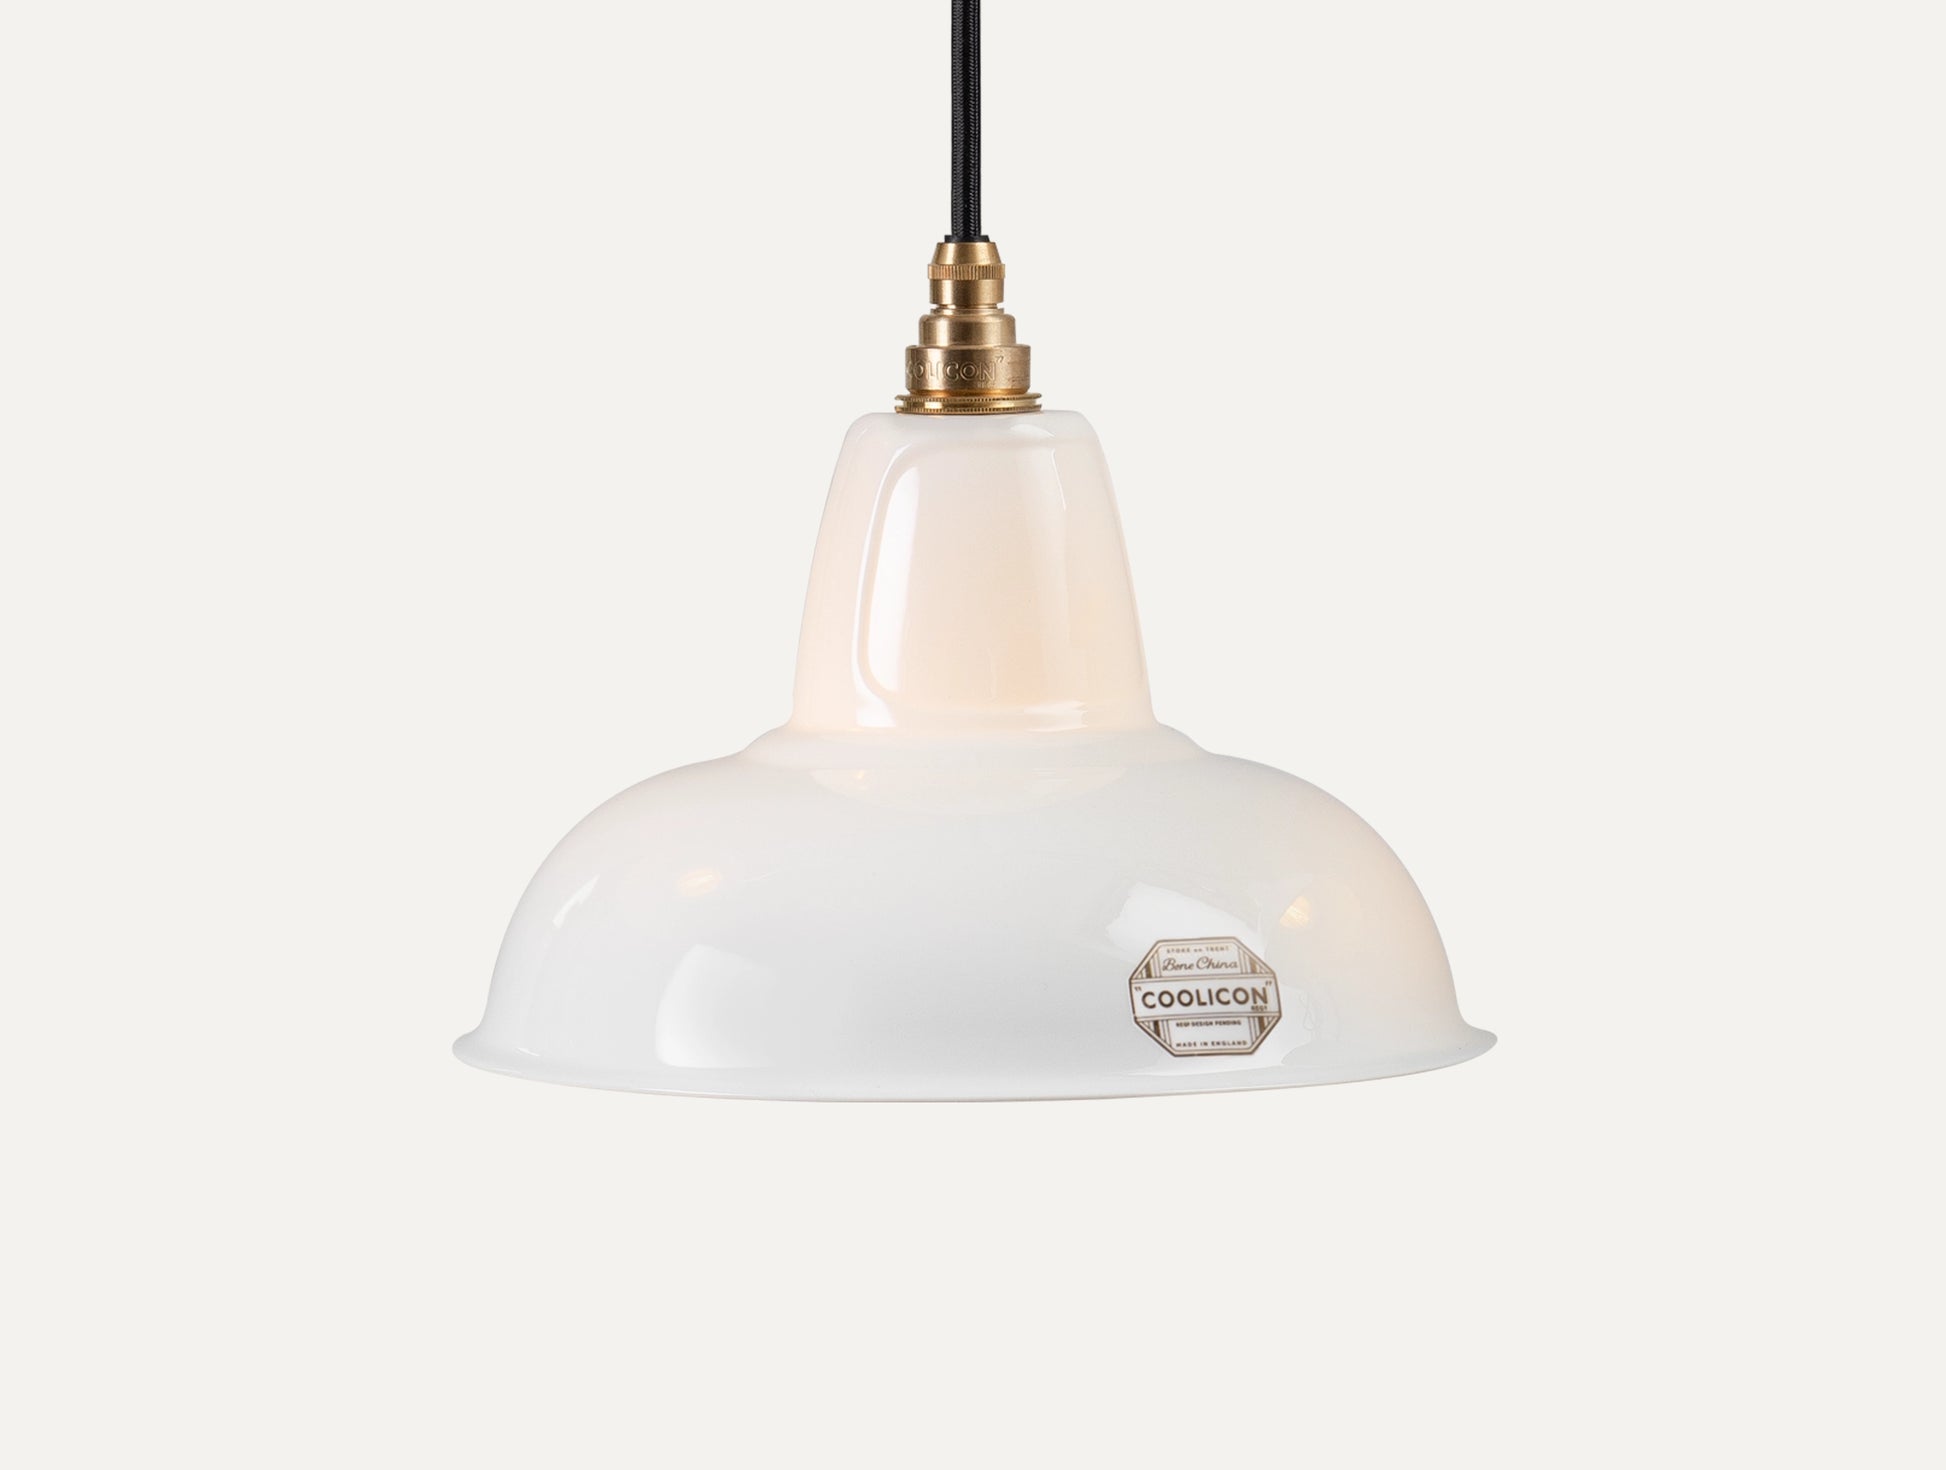 A Fine Bone China Silhouette Coolicon shade with a Signature Brass pendant set hangs over a light grey background